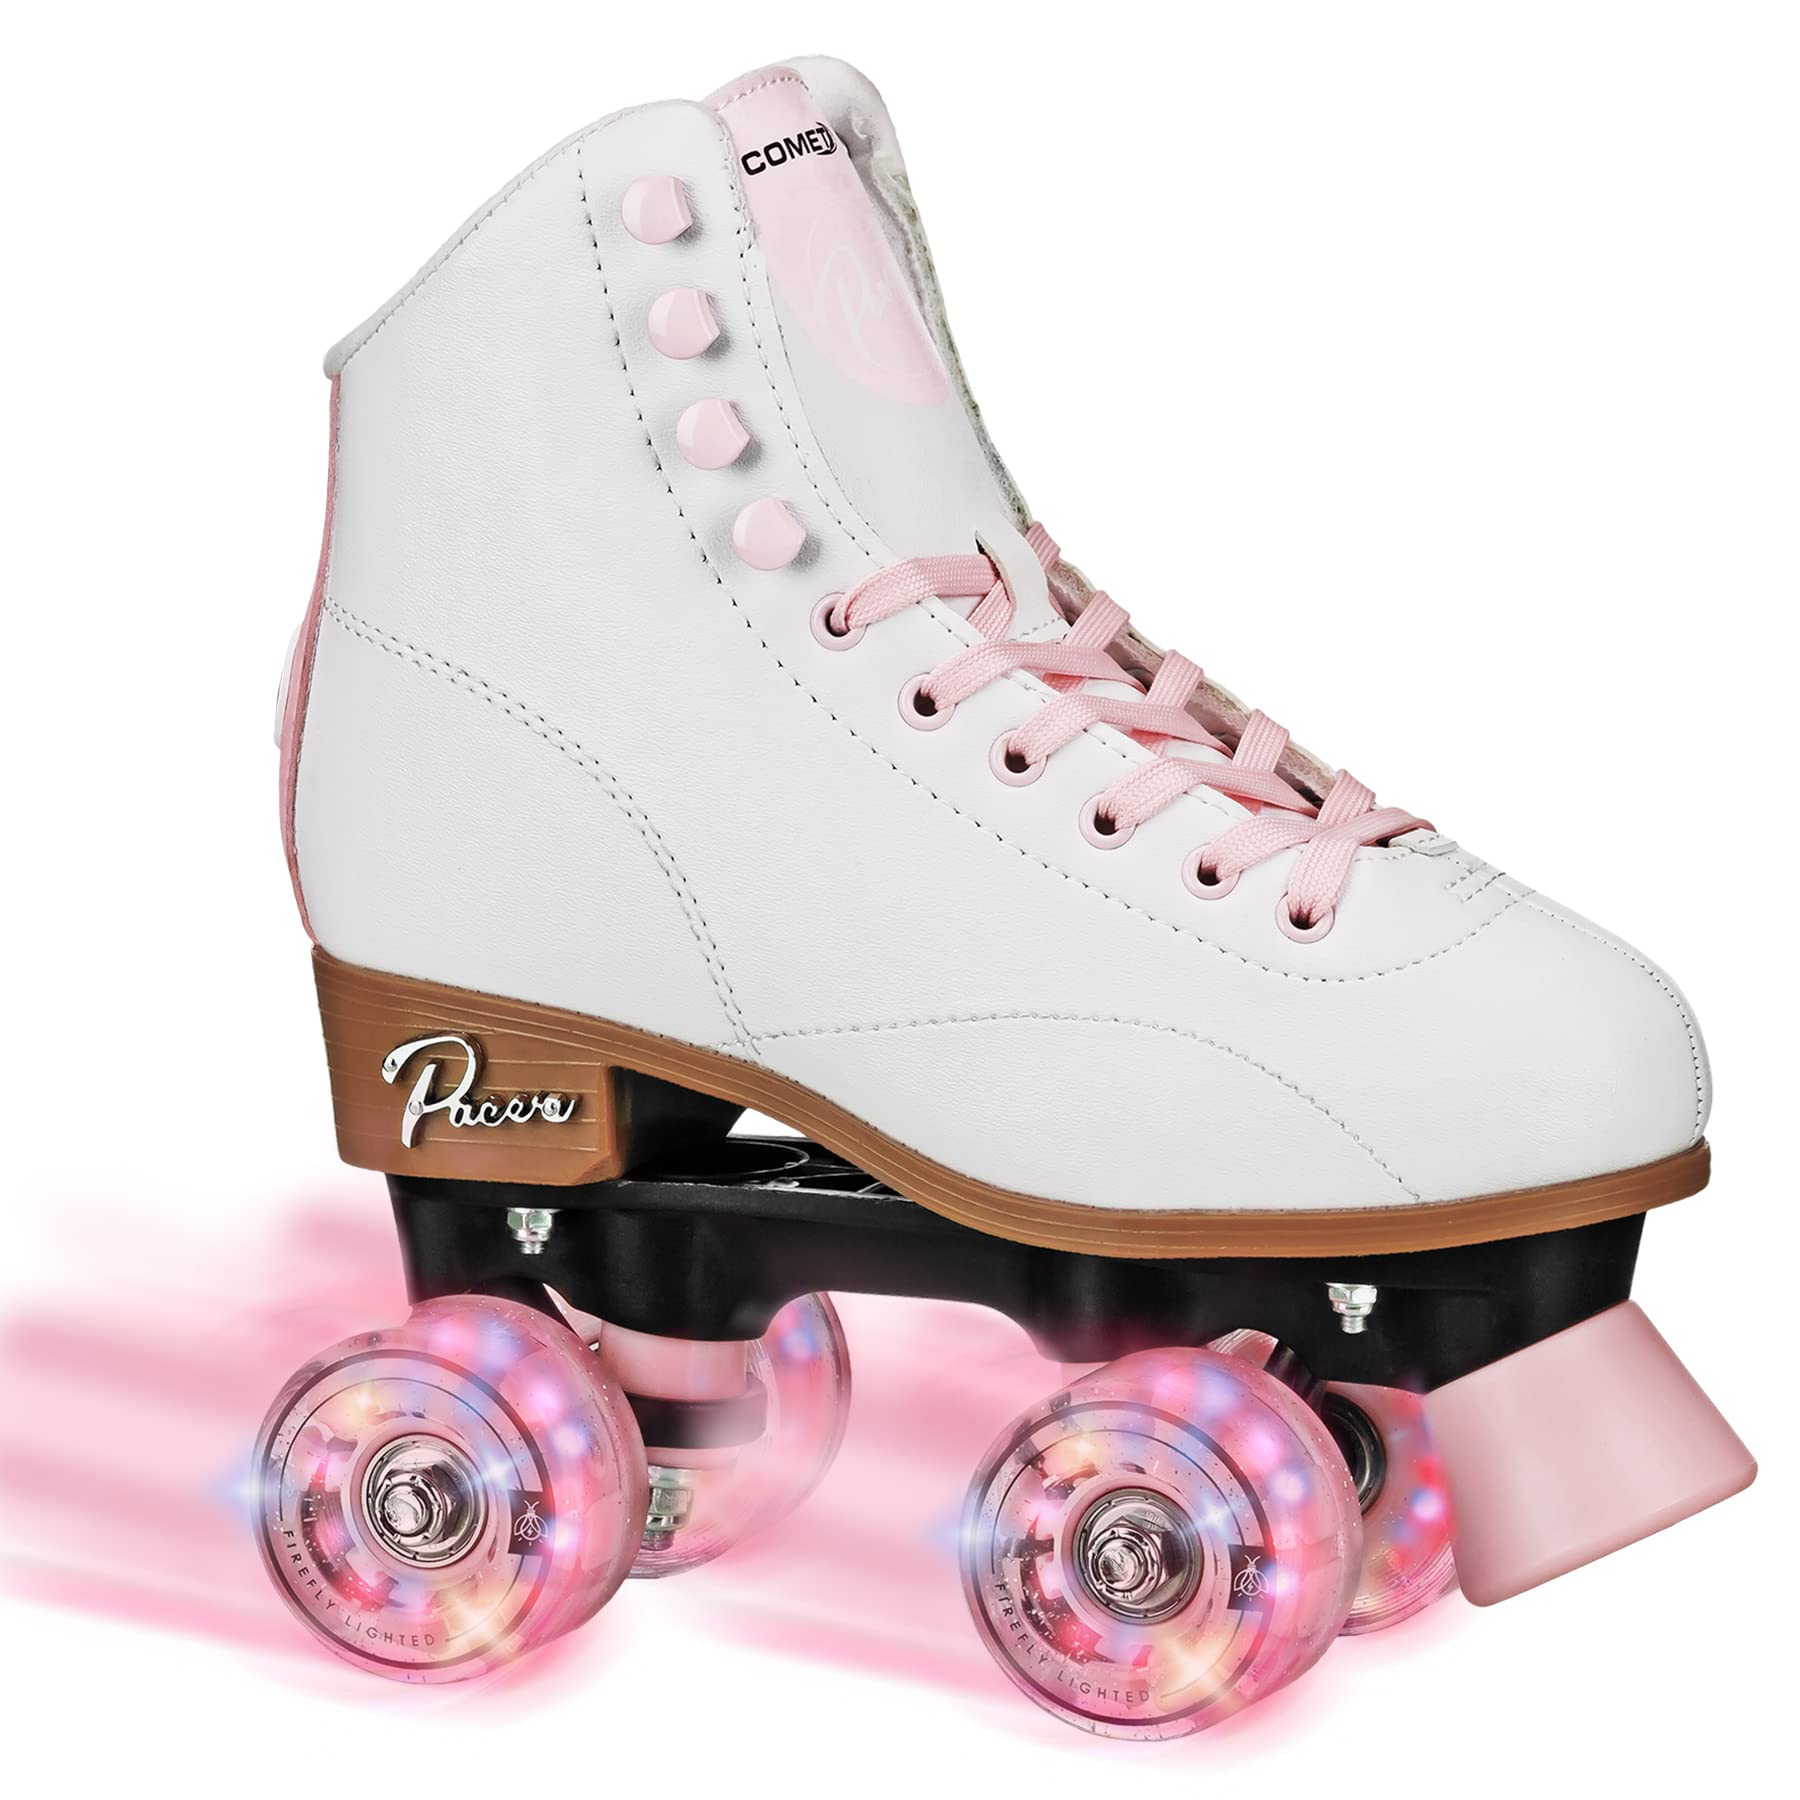 Pacer Comet Hightop Youth Skate with Light Up Wheels White/Pink Size Youth 4